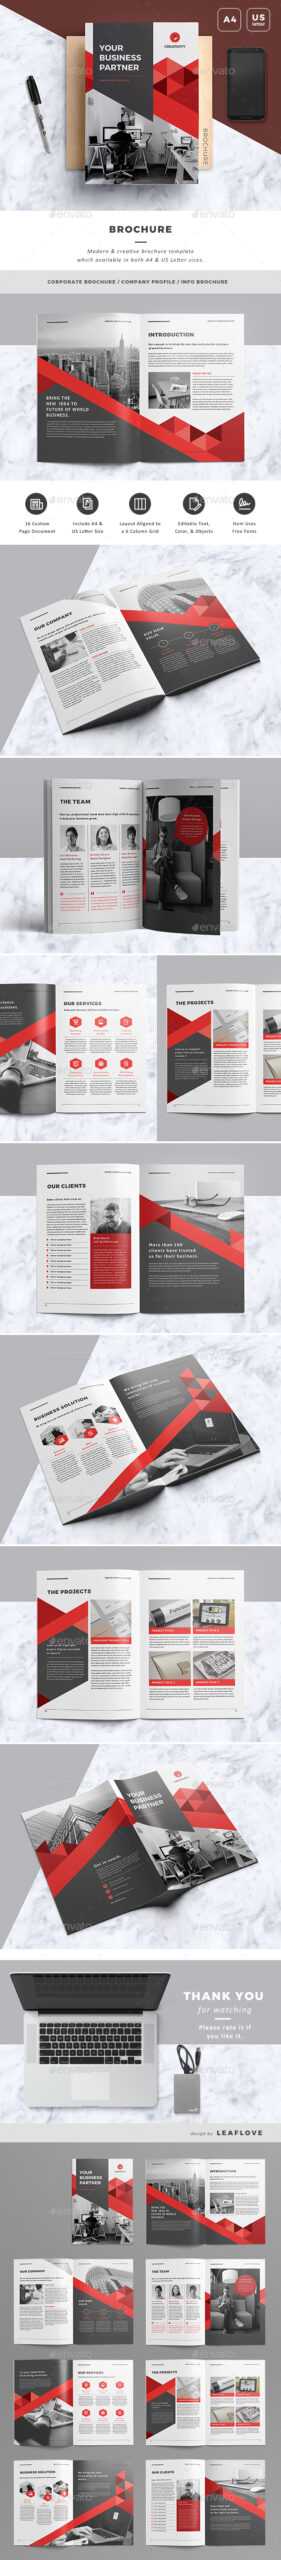 Letter Brochure Templates From Graphicriver Intended For Letter Size Brochure Template